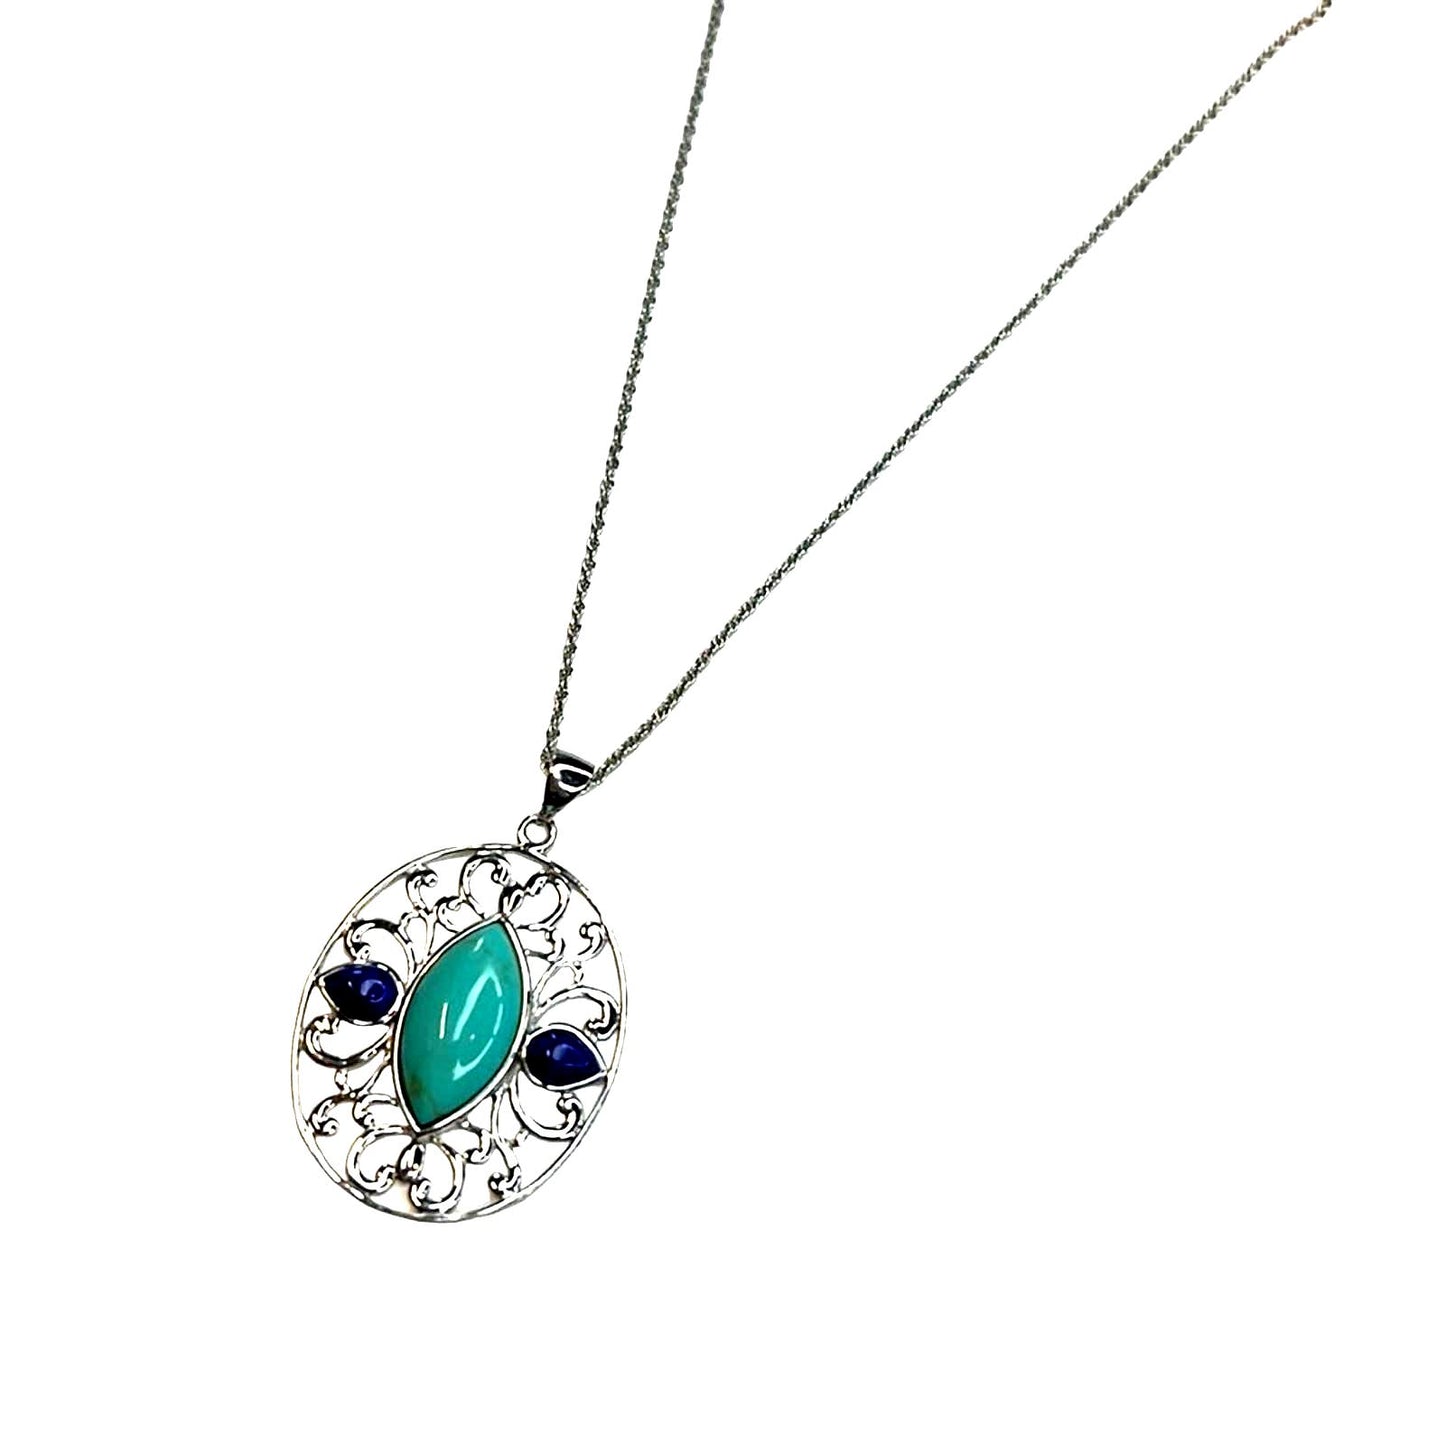 R. H. Macy Silver, Turquoise & Lapis Filigree Necklace, NWT!